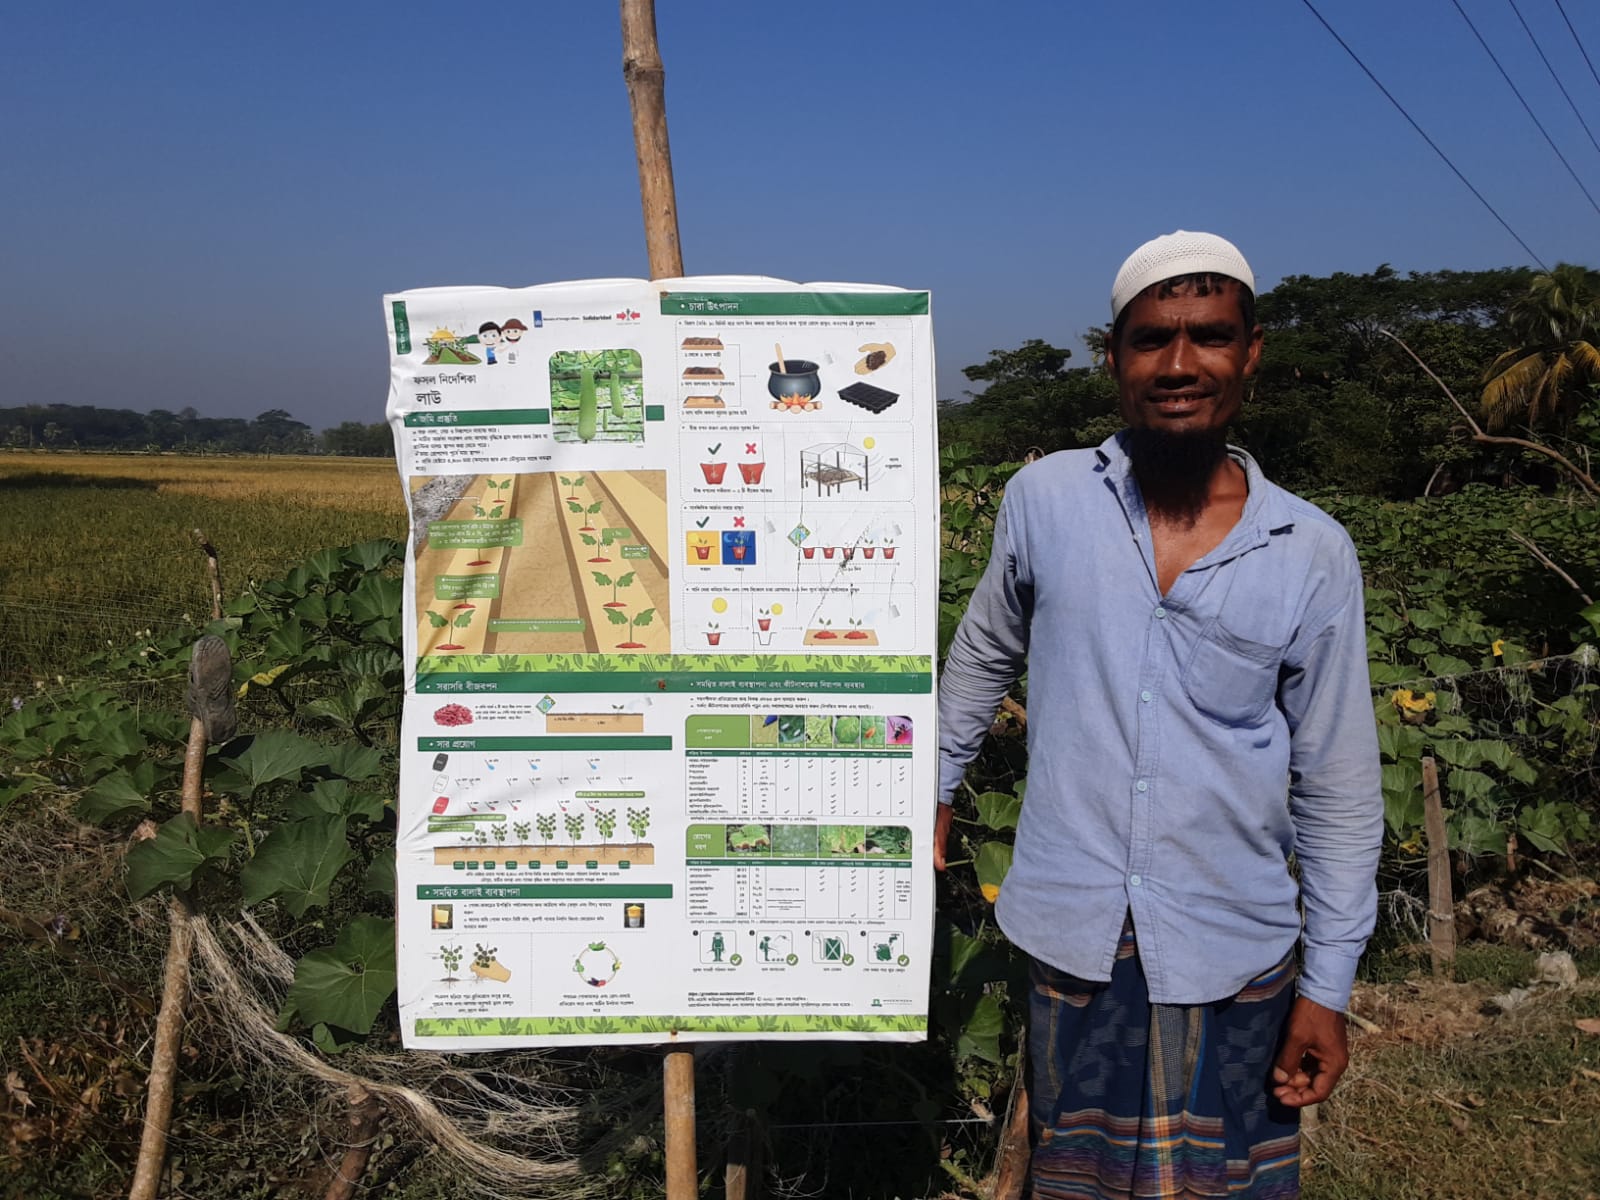 farmer in Bangladesh stands by the signboard for his demo plot